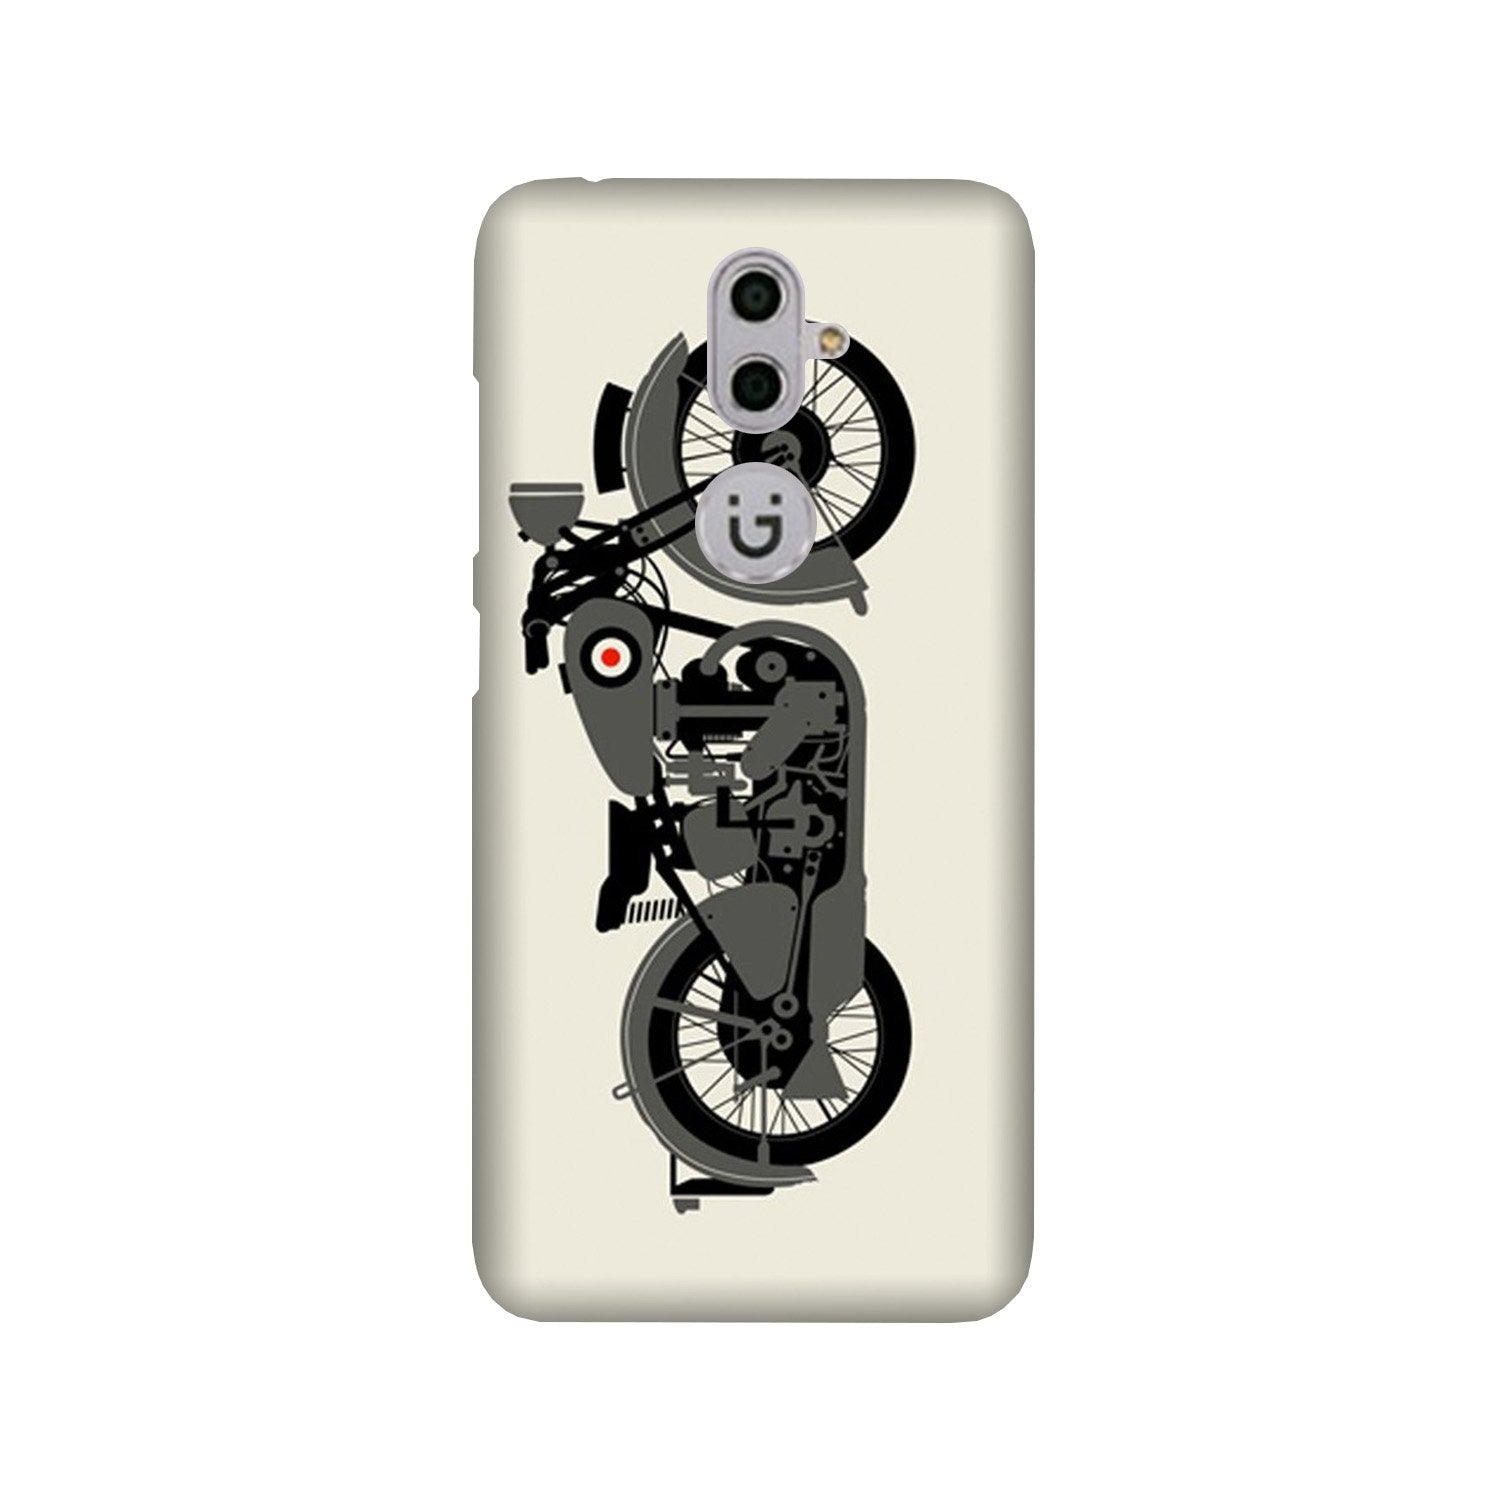 MotorCycle Case for Gionee S9 (Design No. 259)